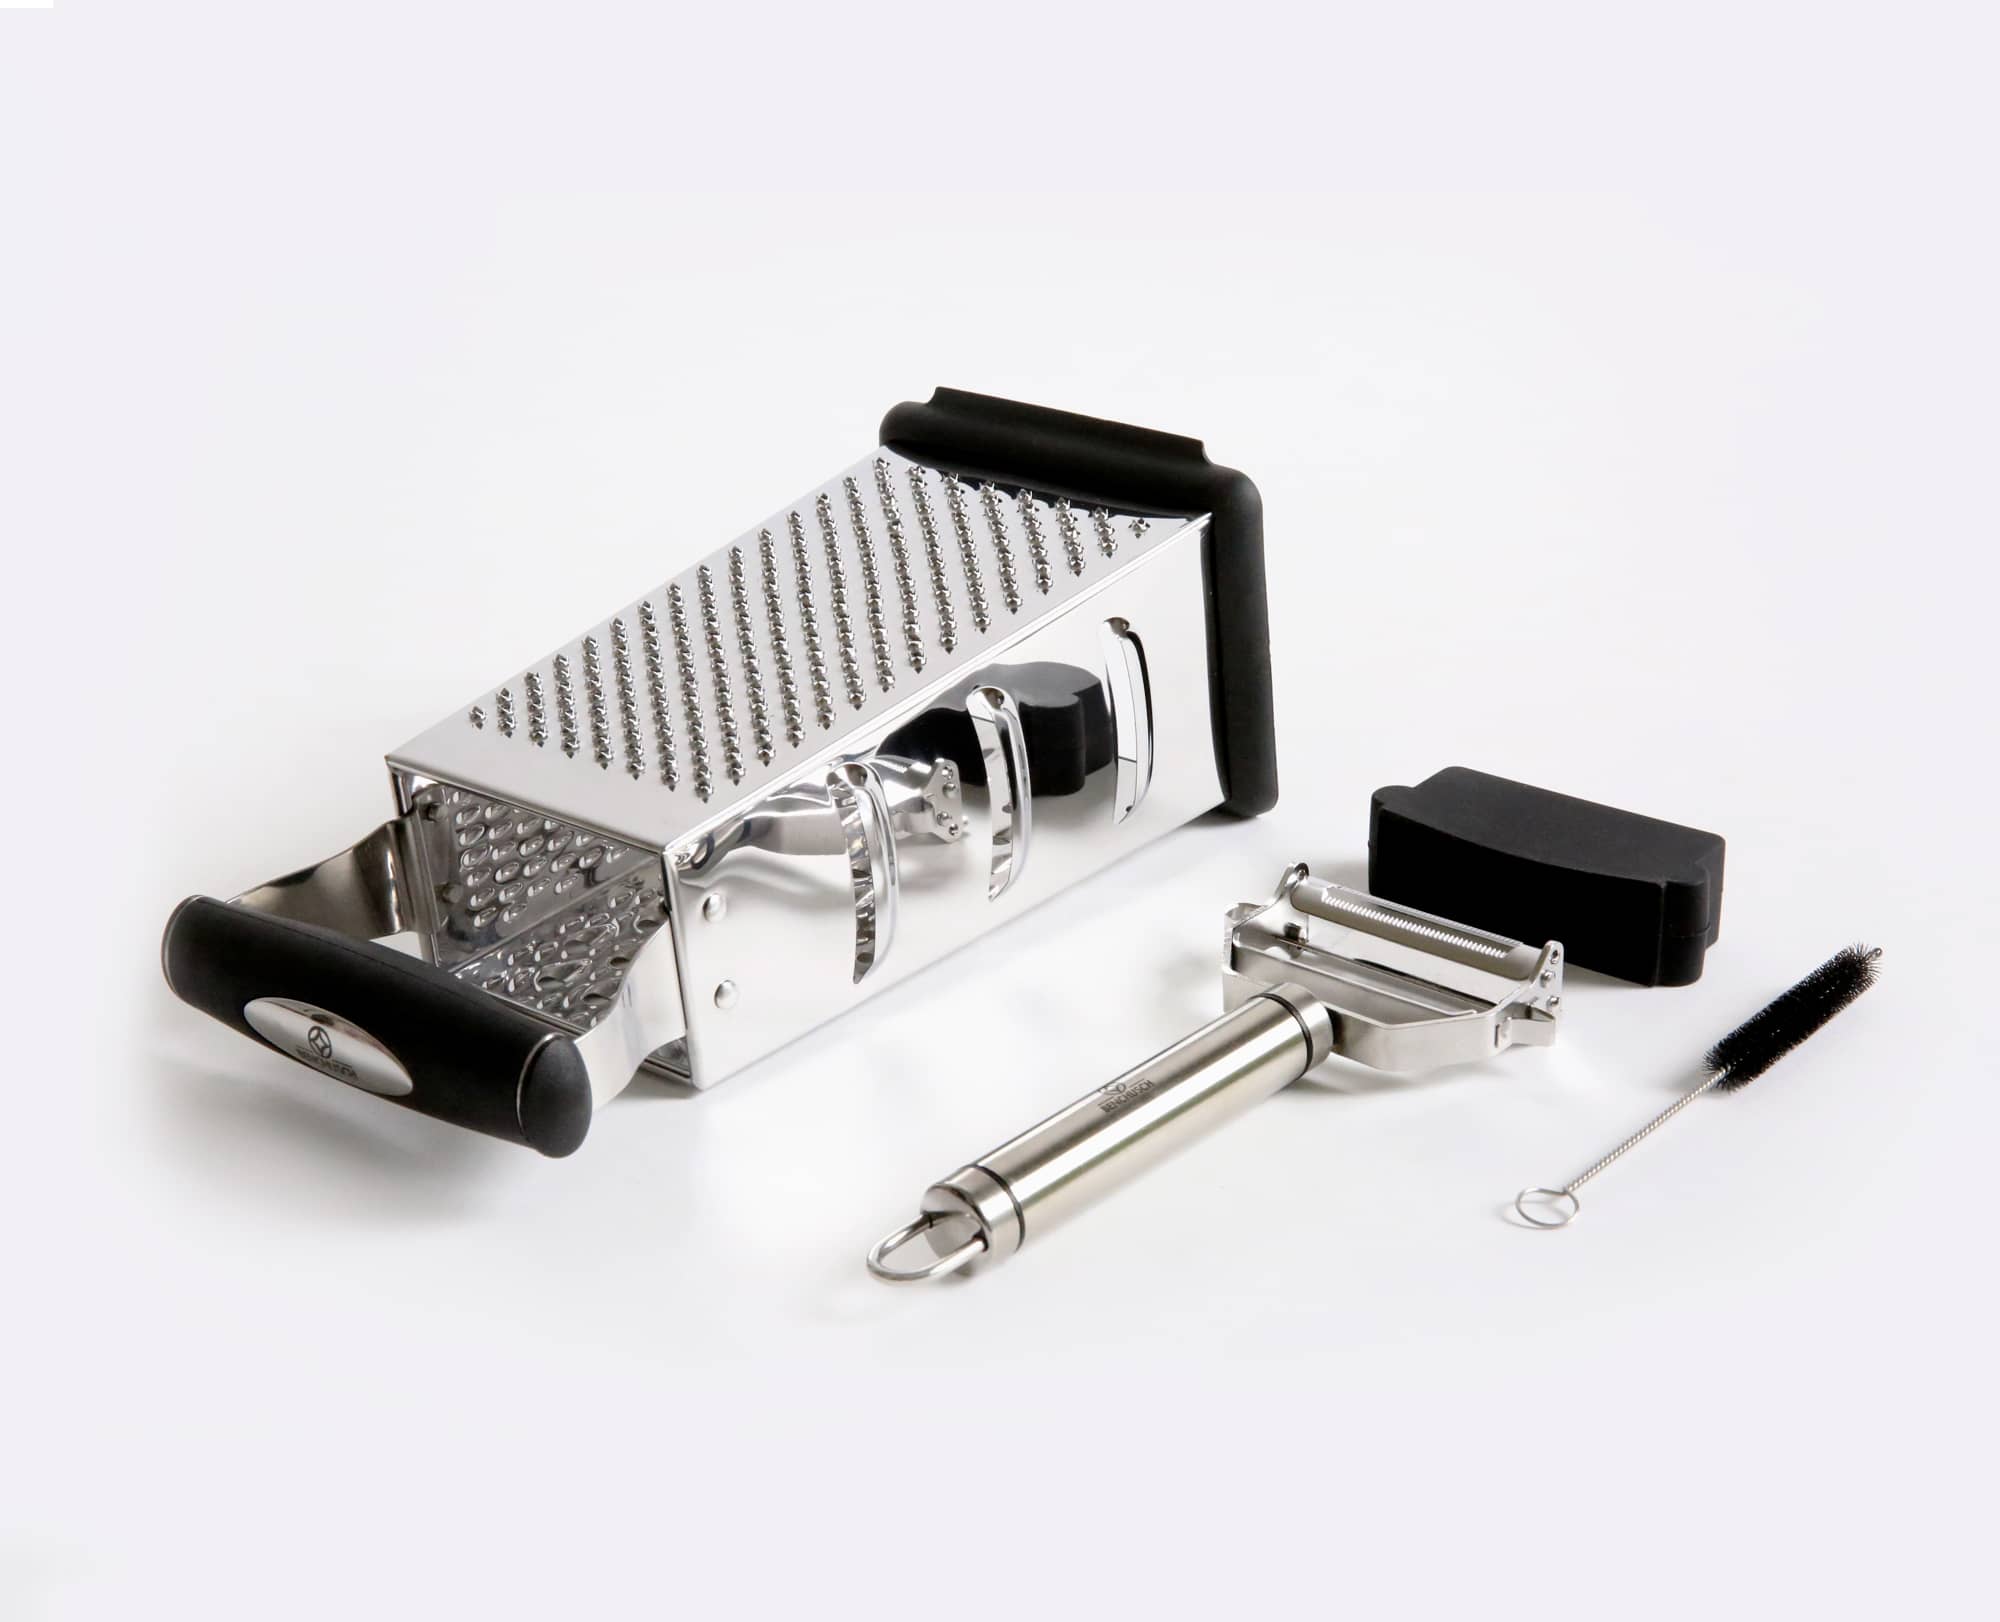 Benchusch 4 Sided Grater Box & Peeler Set, black color with stainless steel blade, Non-Slip Base and Ergonomic Handle